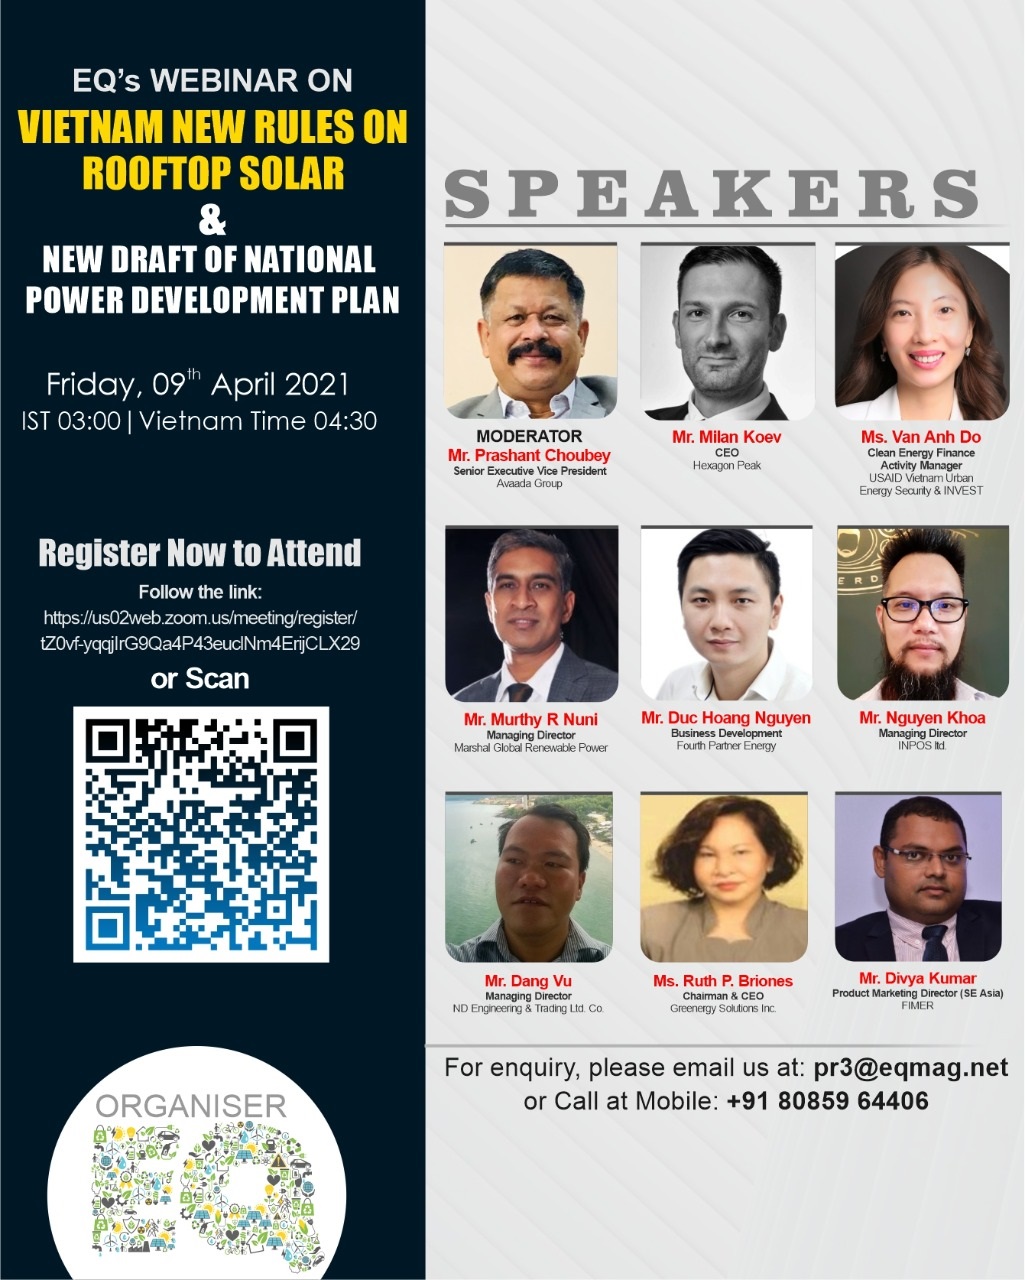 EQ Webinar on Vietnam New Rules on RoofTop Solar & New Draft of National Power Development Plan on Friday April 09th from 03:00 PM Onwards….Register Now !!!